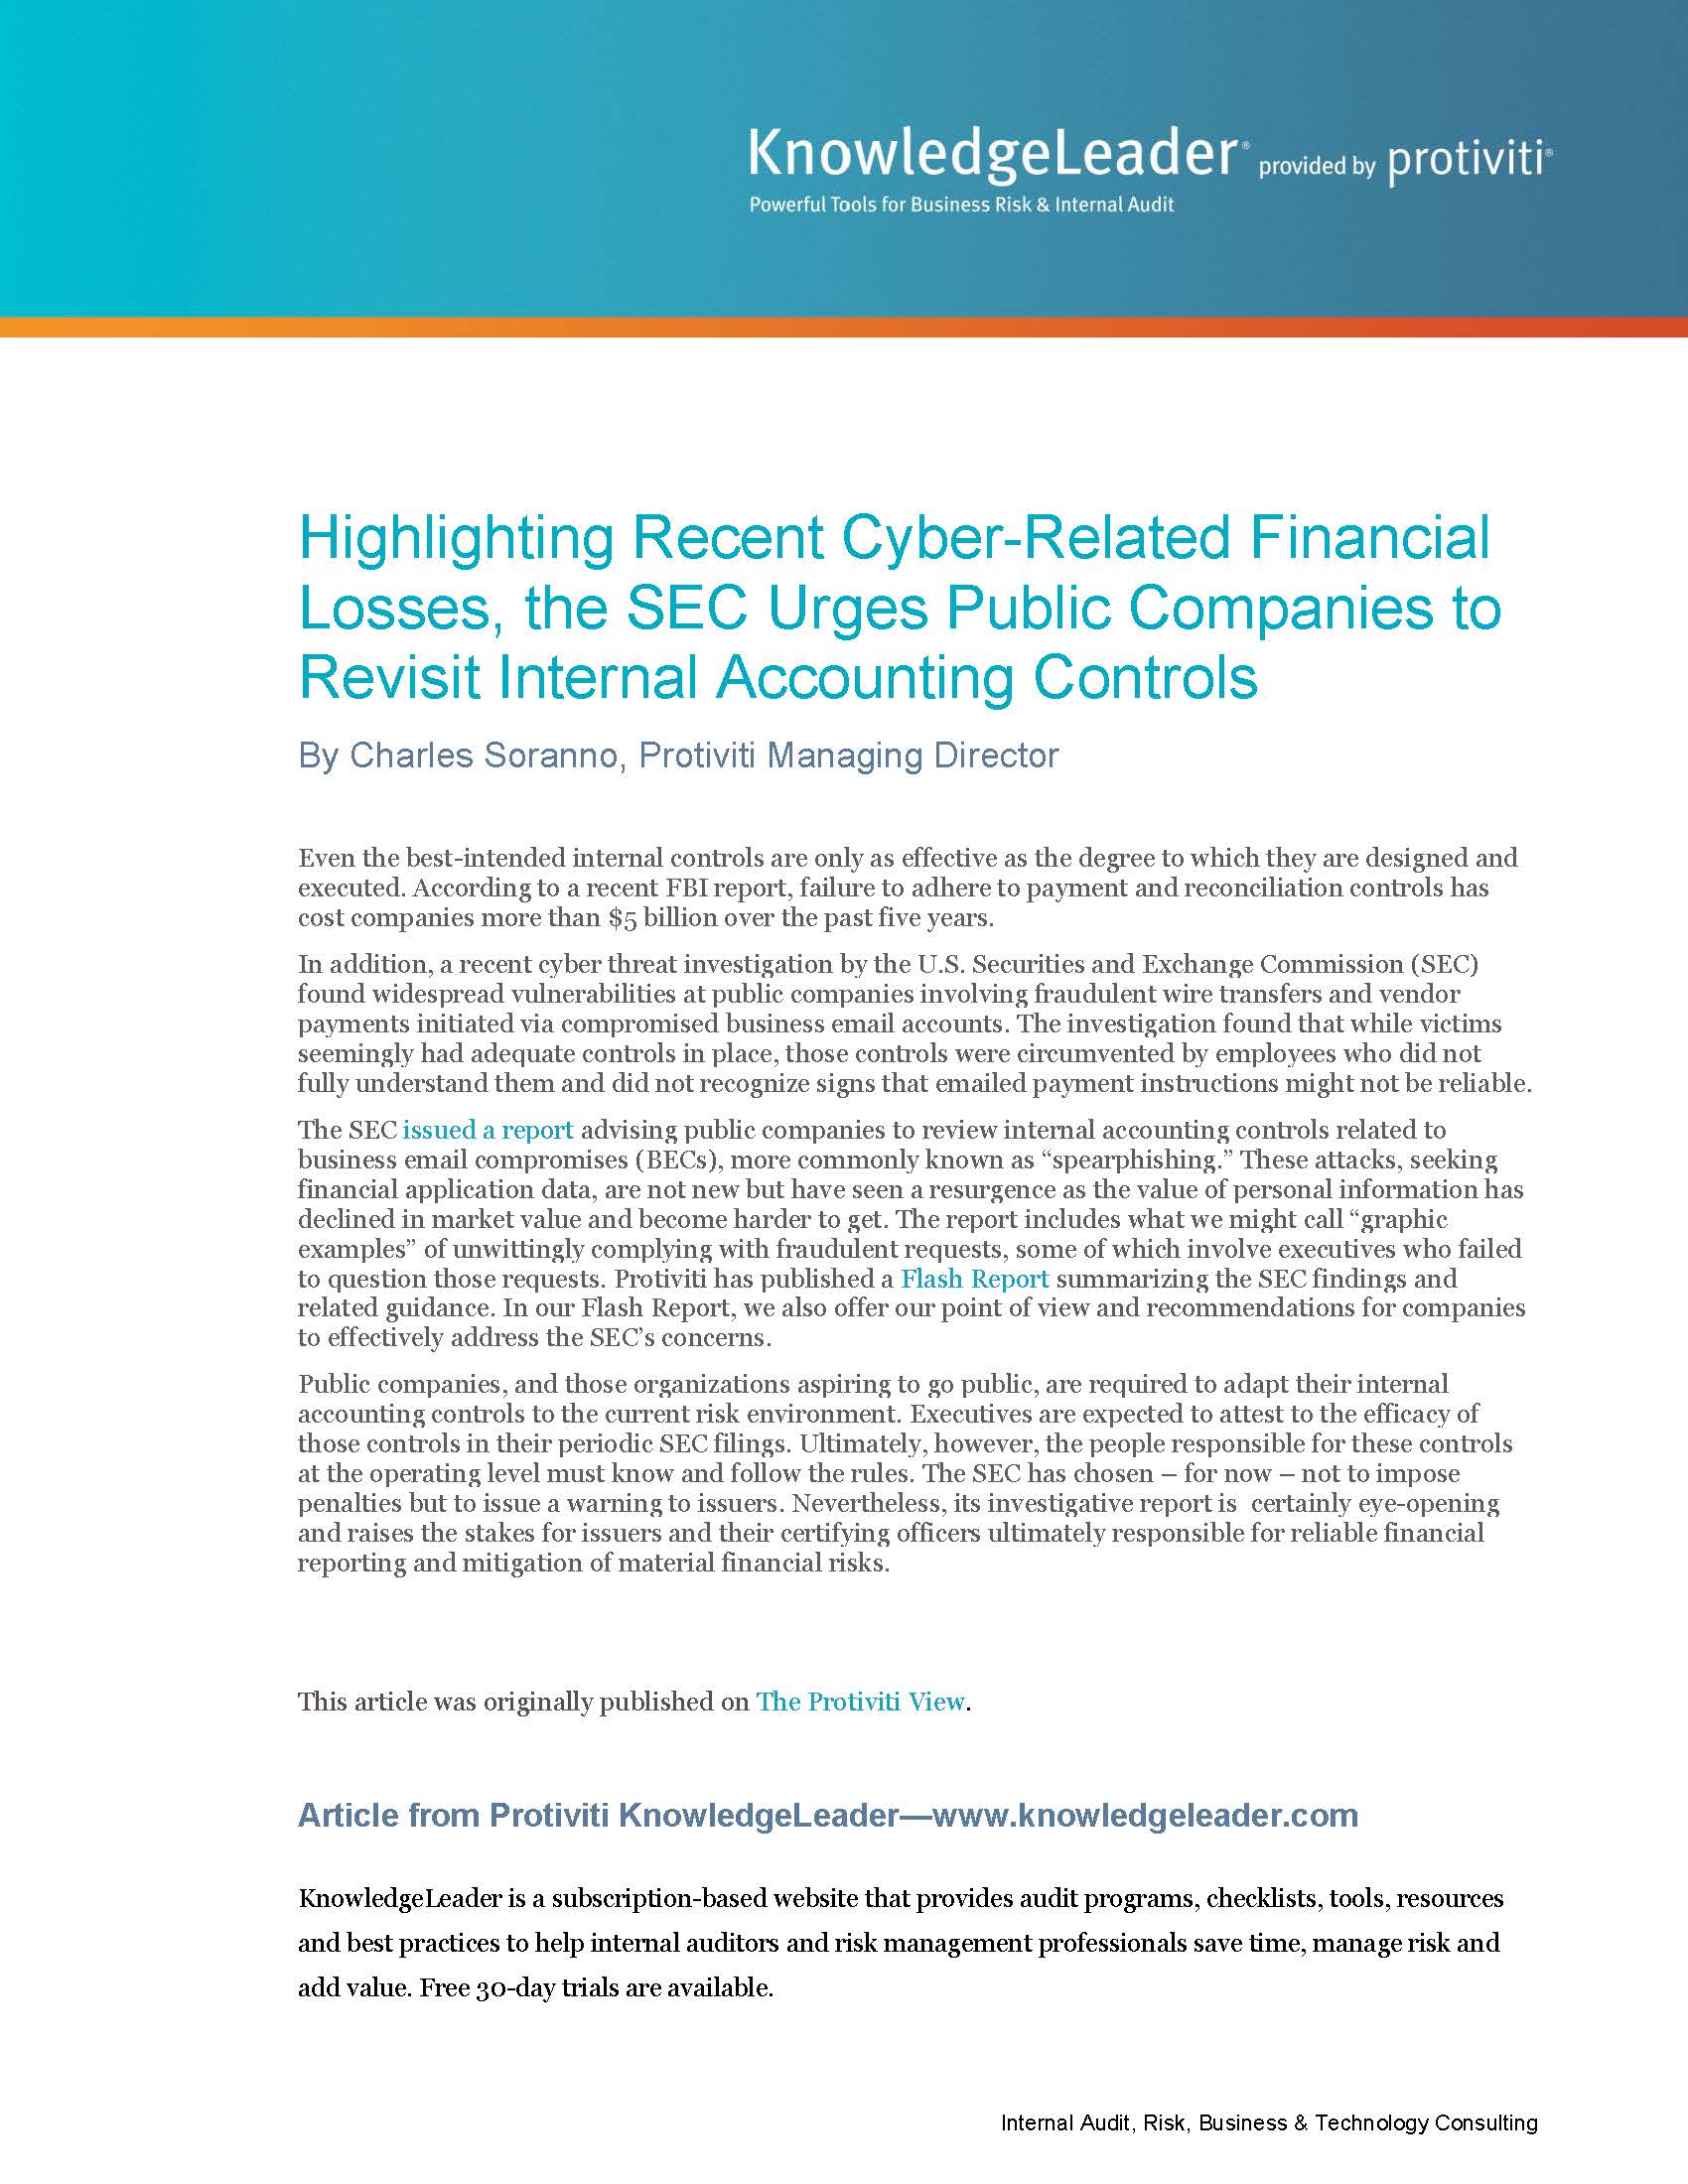 Screenshot of the first page of Highlighting Recent Cyber-Related Financial Losses, the SEC Urges Public Companies to Revisit Internal Accounting Controls